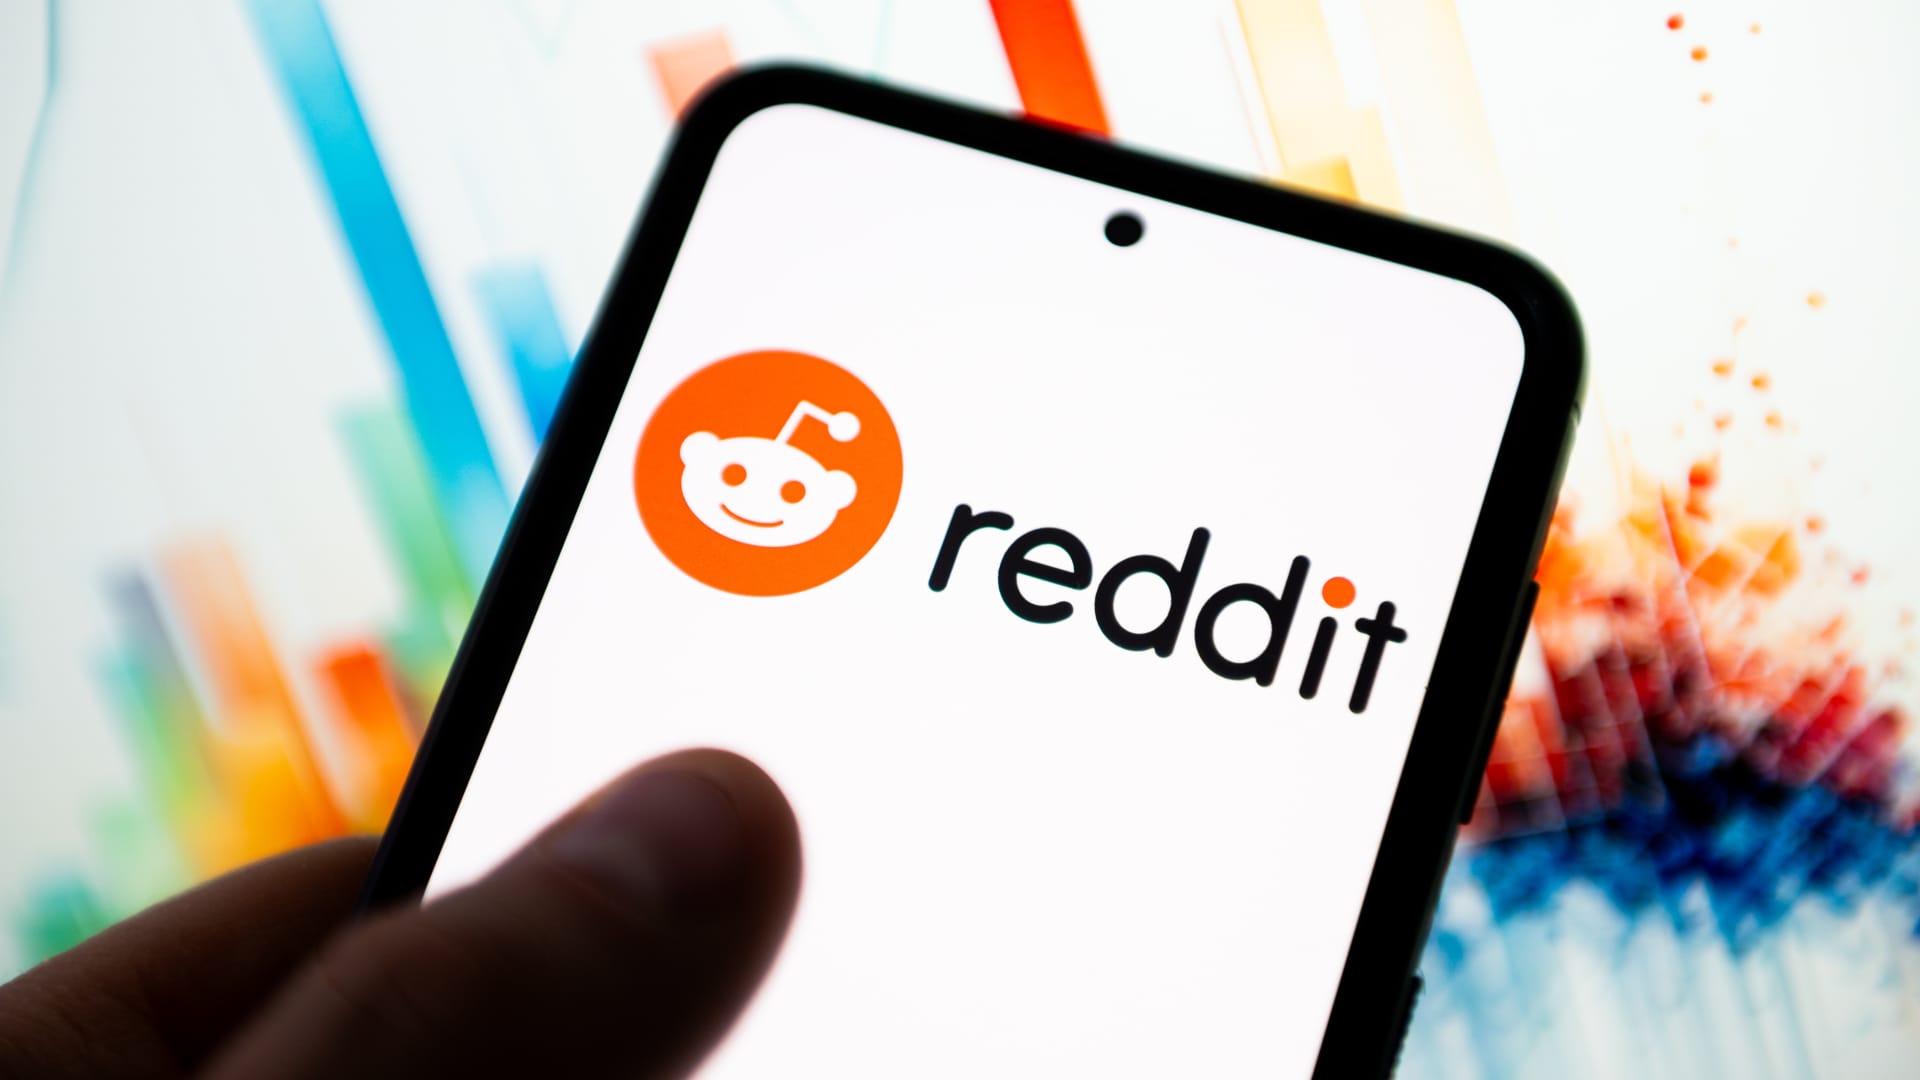 FTC investigating Reddit over AI data-licensing practices ahead of IPO